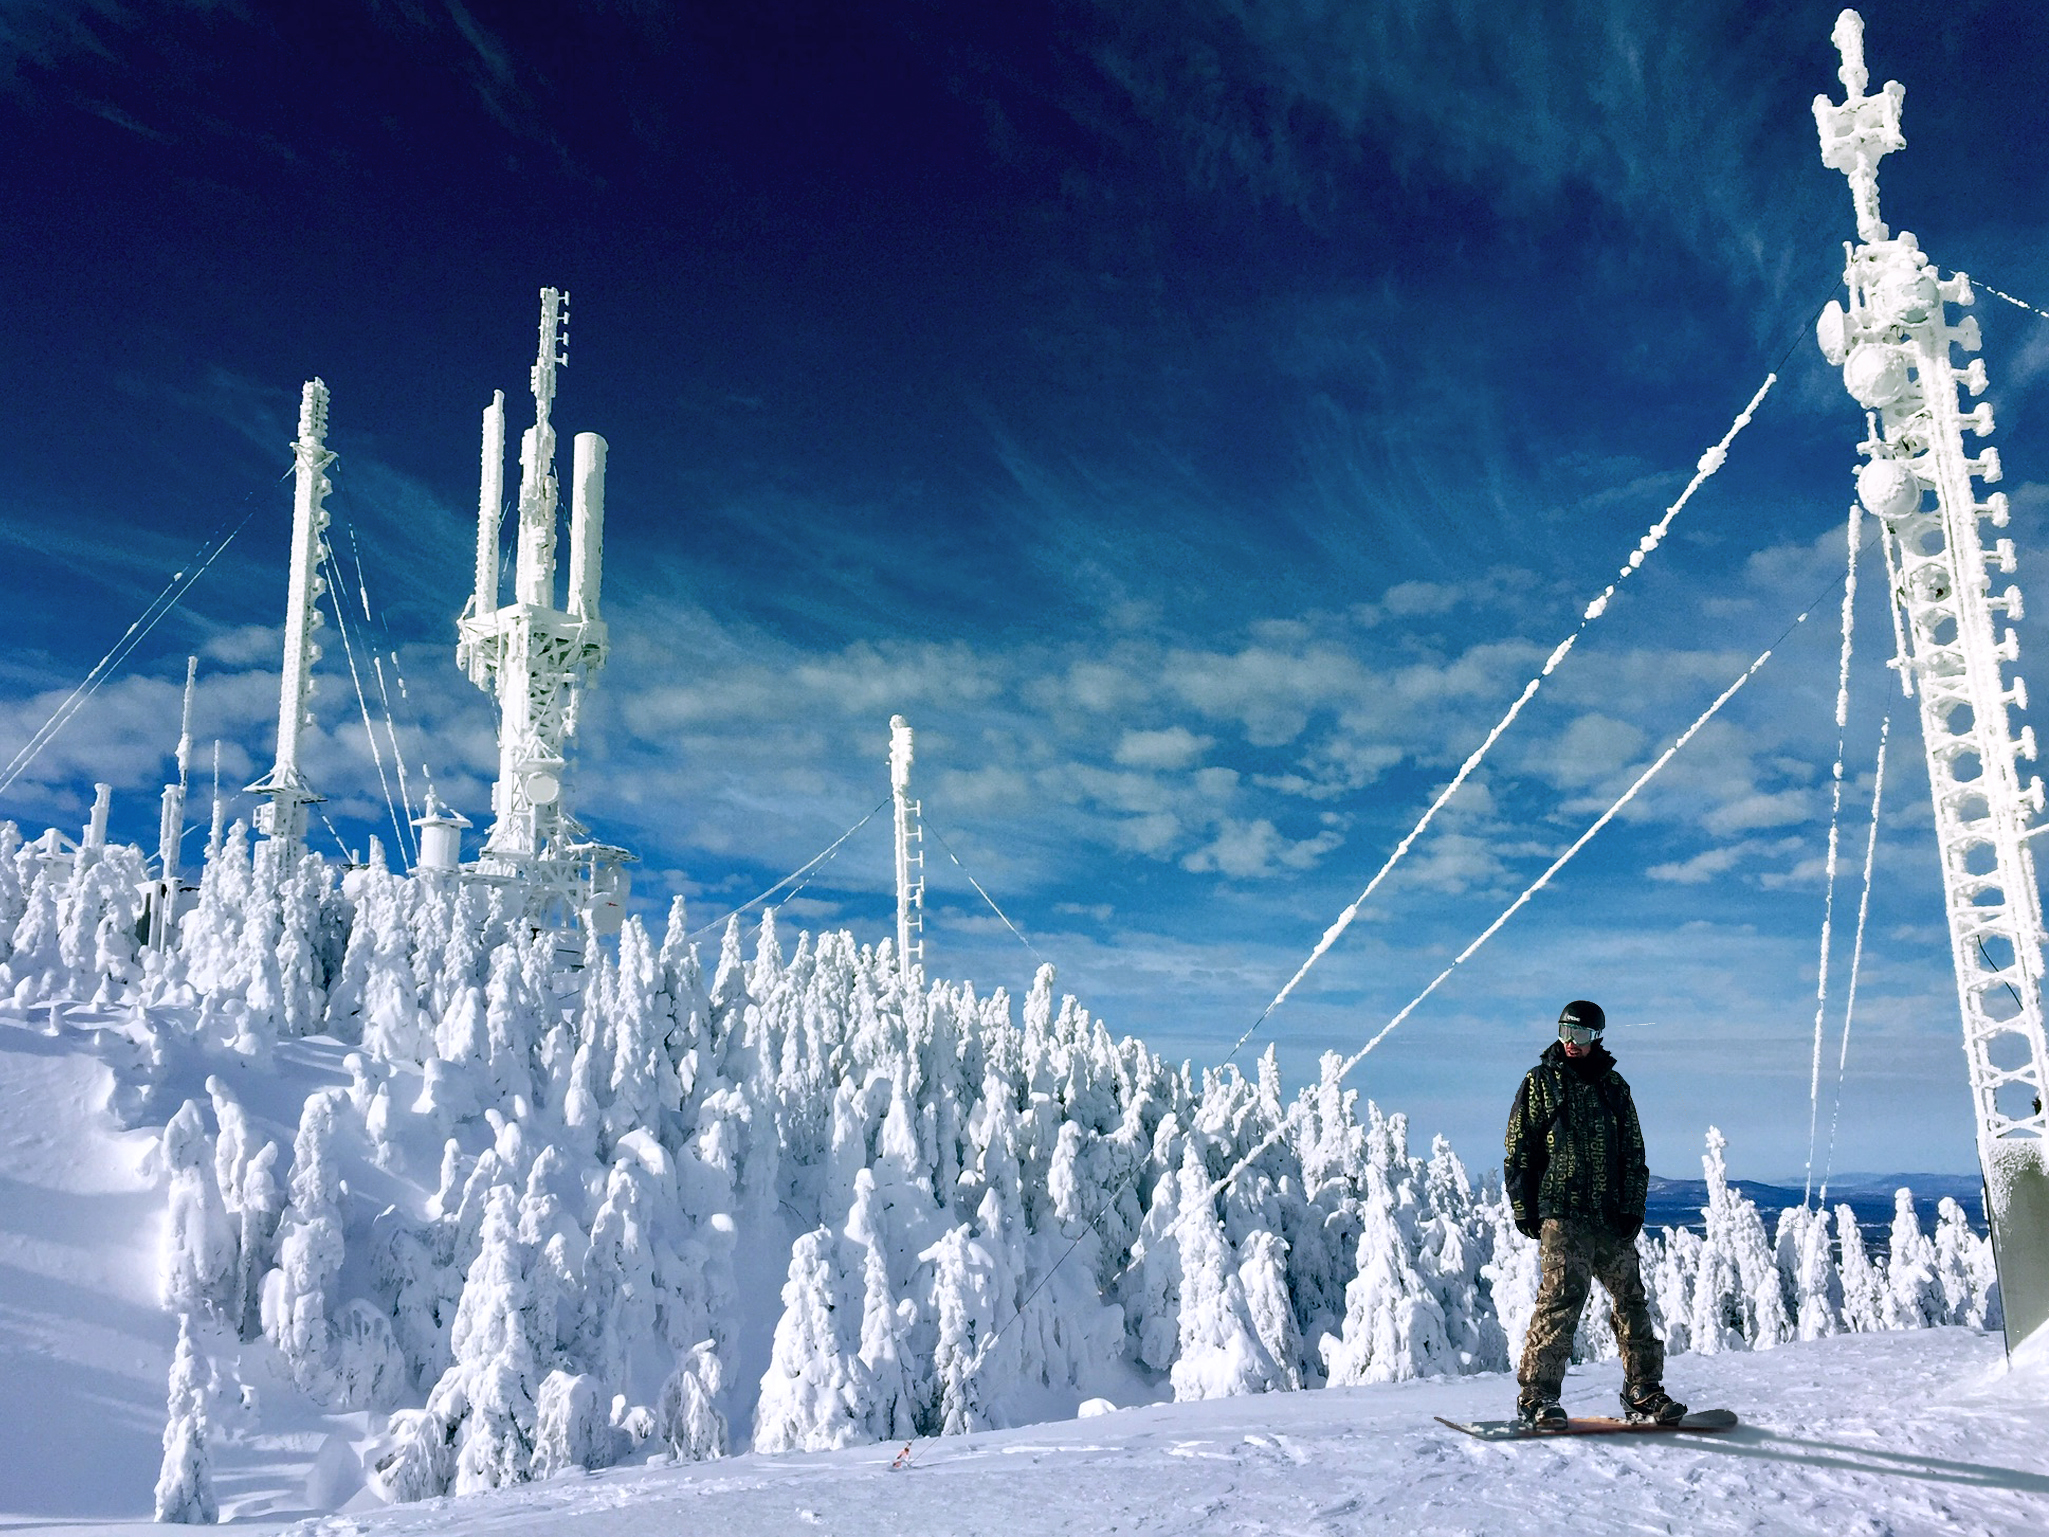  A person dressed in ski gear,  who is stationary on a snowboard in a snowy area. There are  trees covered in snow in the background and the sky is blue with some cloud. 